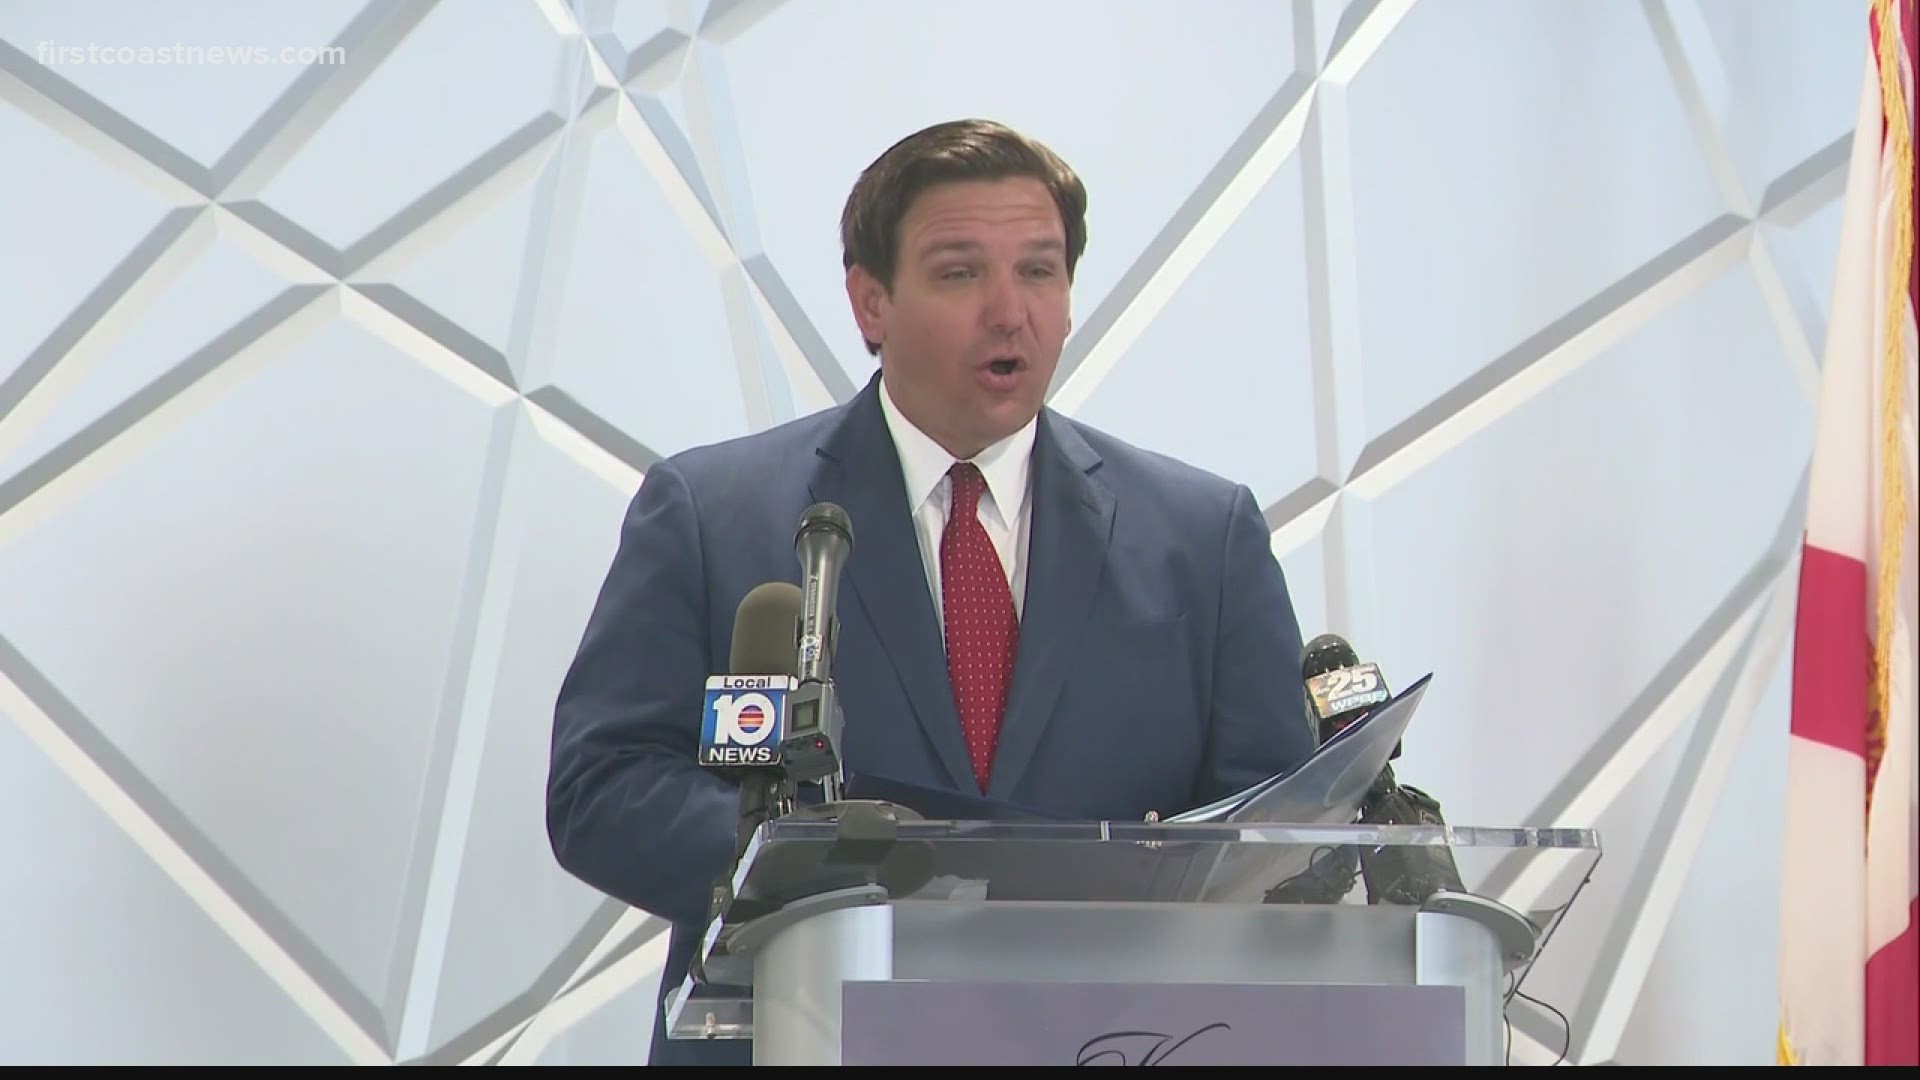 One week ago, DeSantis announced the signing of an executive order to ensure senior citizens are the top priority when it comes to receiving the COVID-19 vaccine.